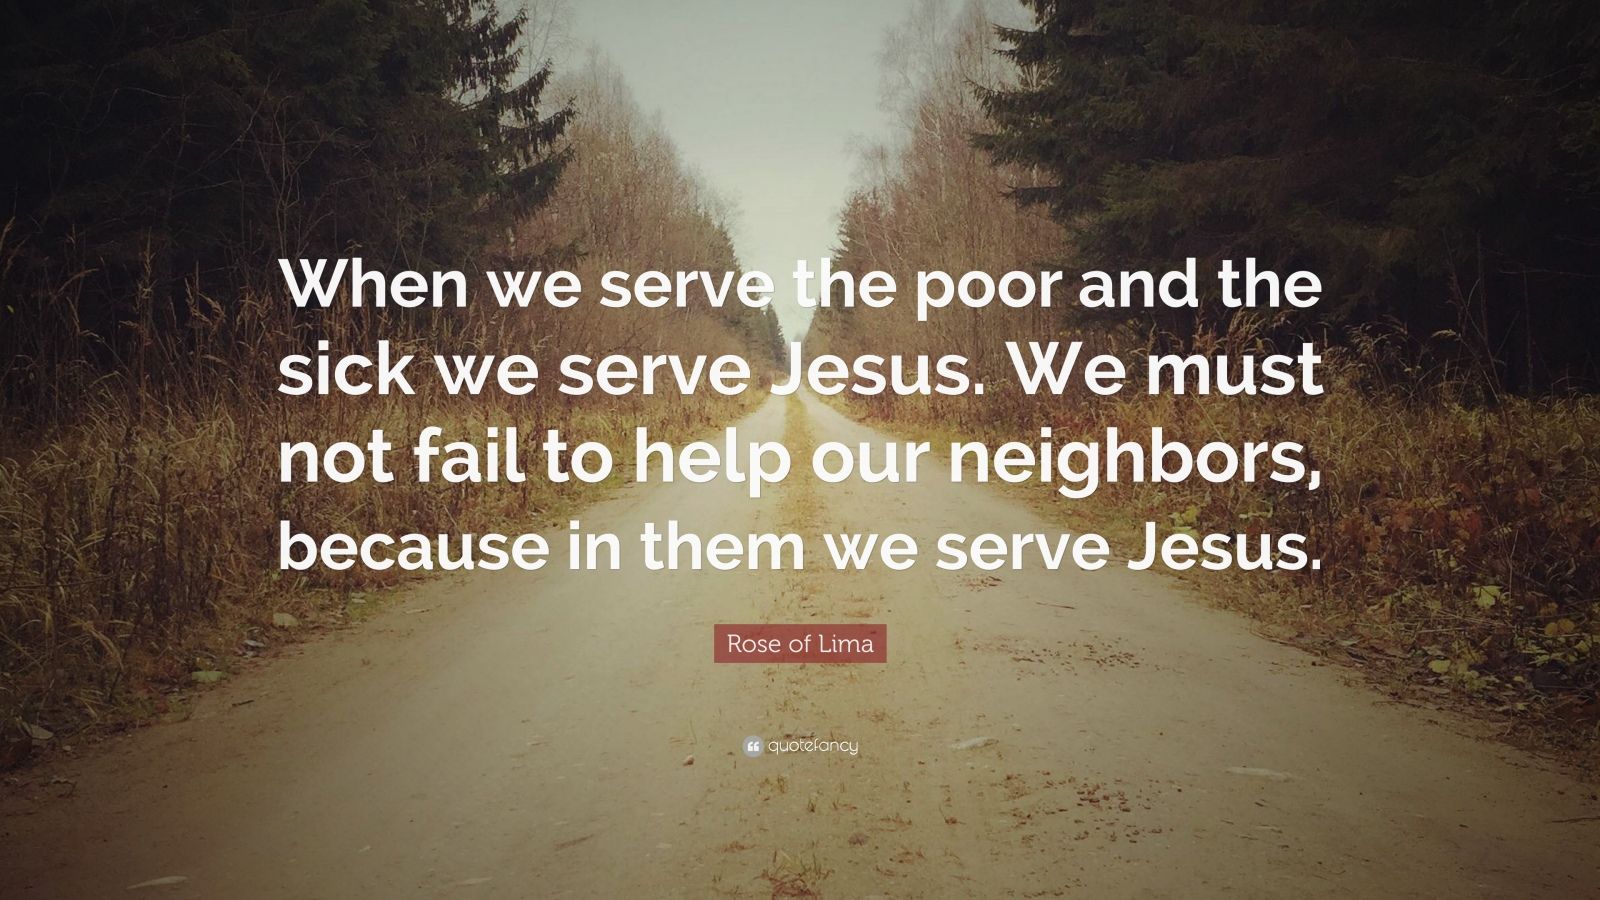 Rose of Lima Quote: “When we serve the poor and the sick we serve Jesus